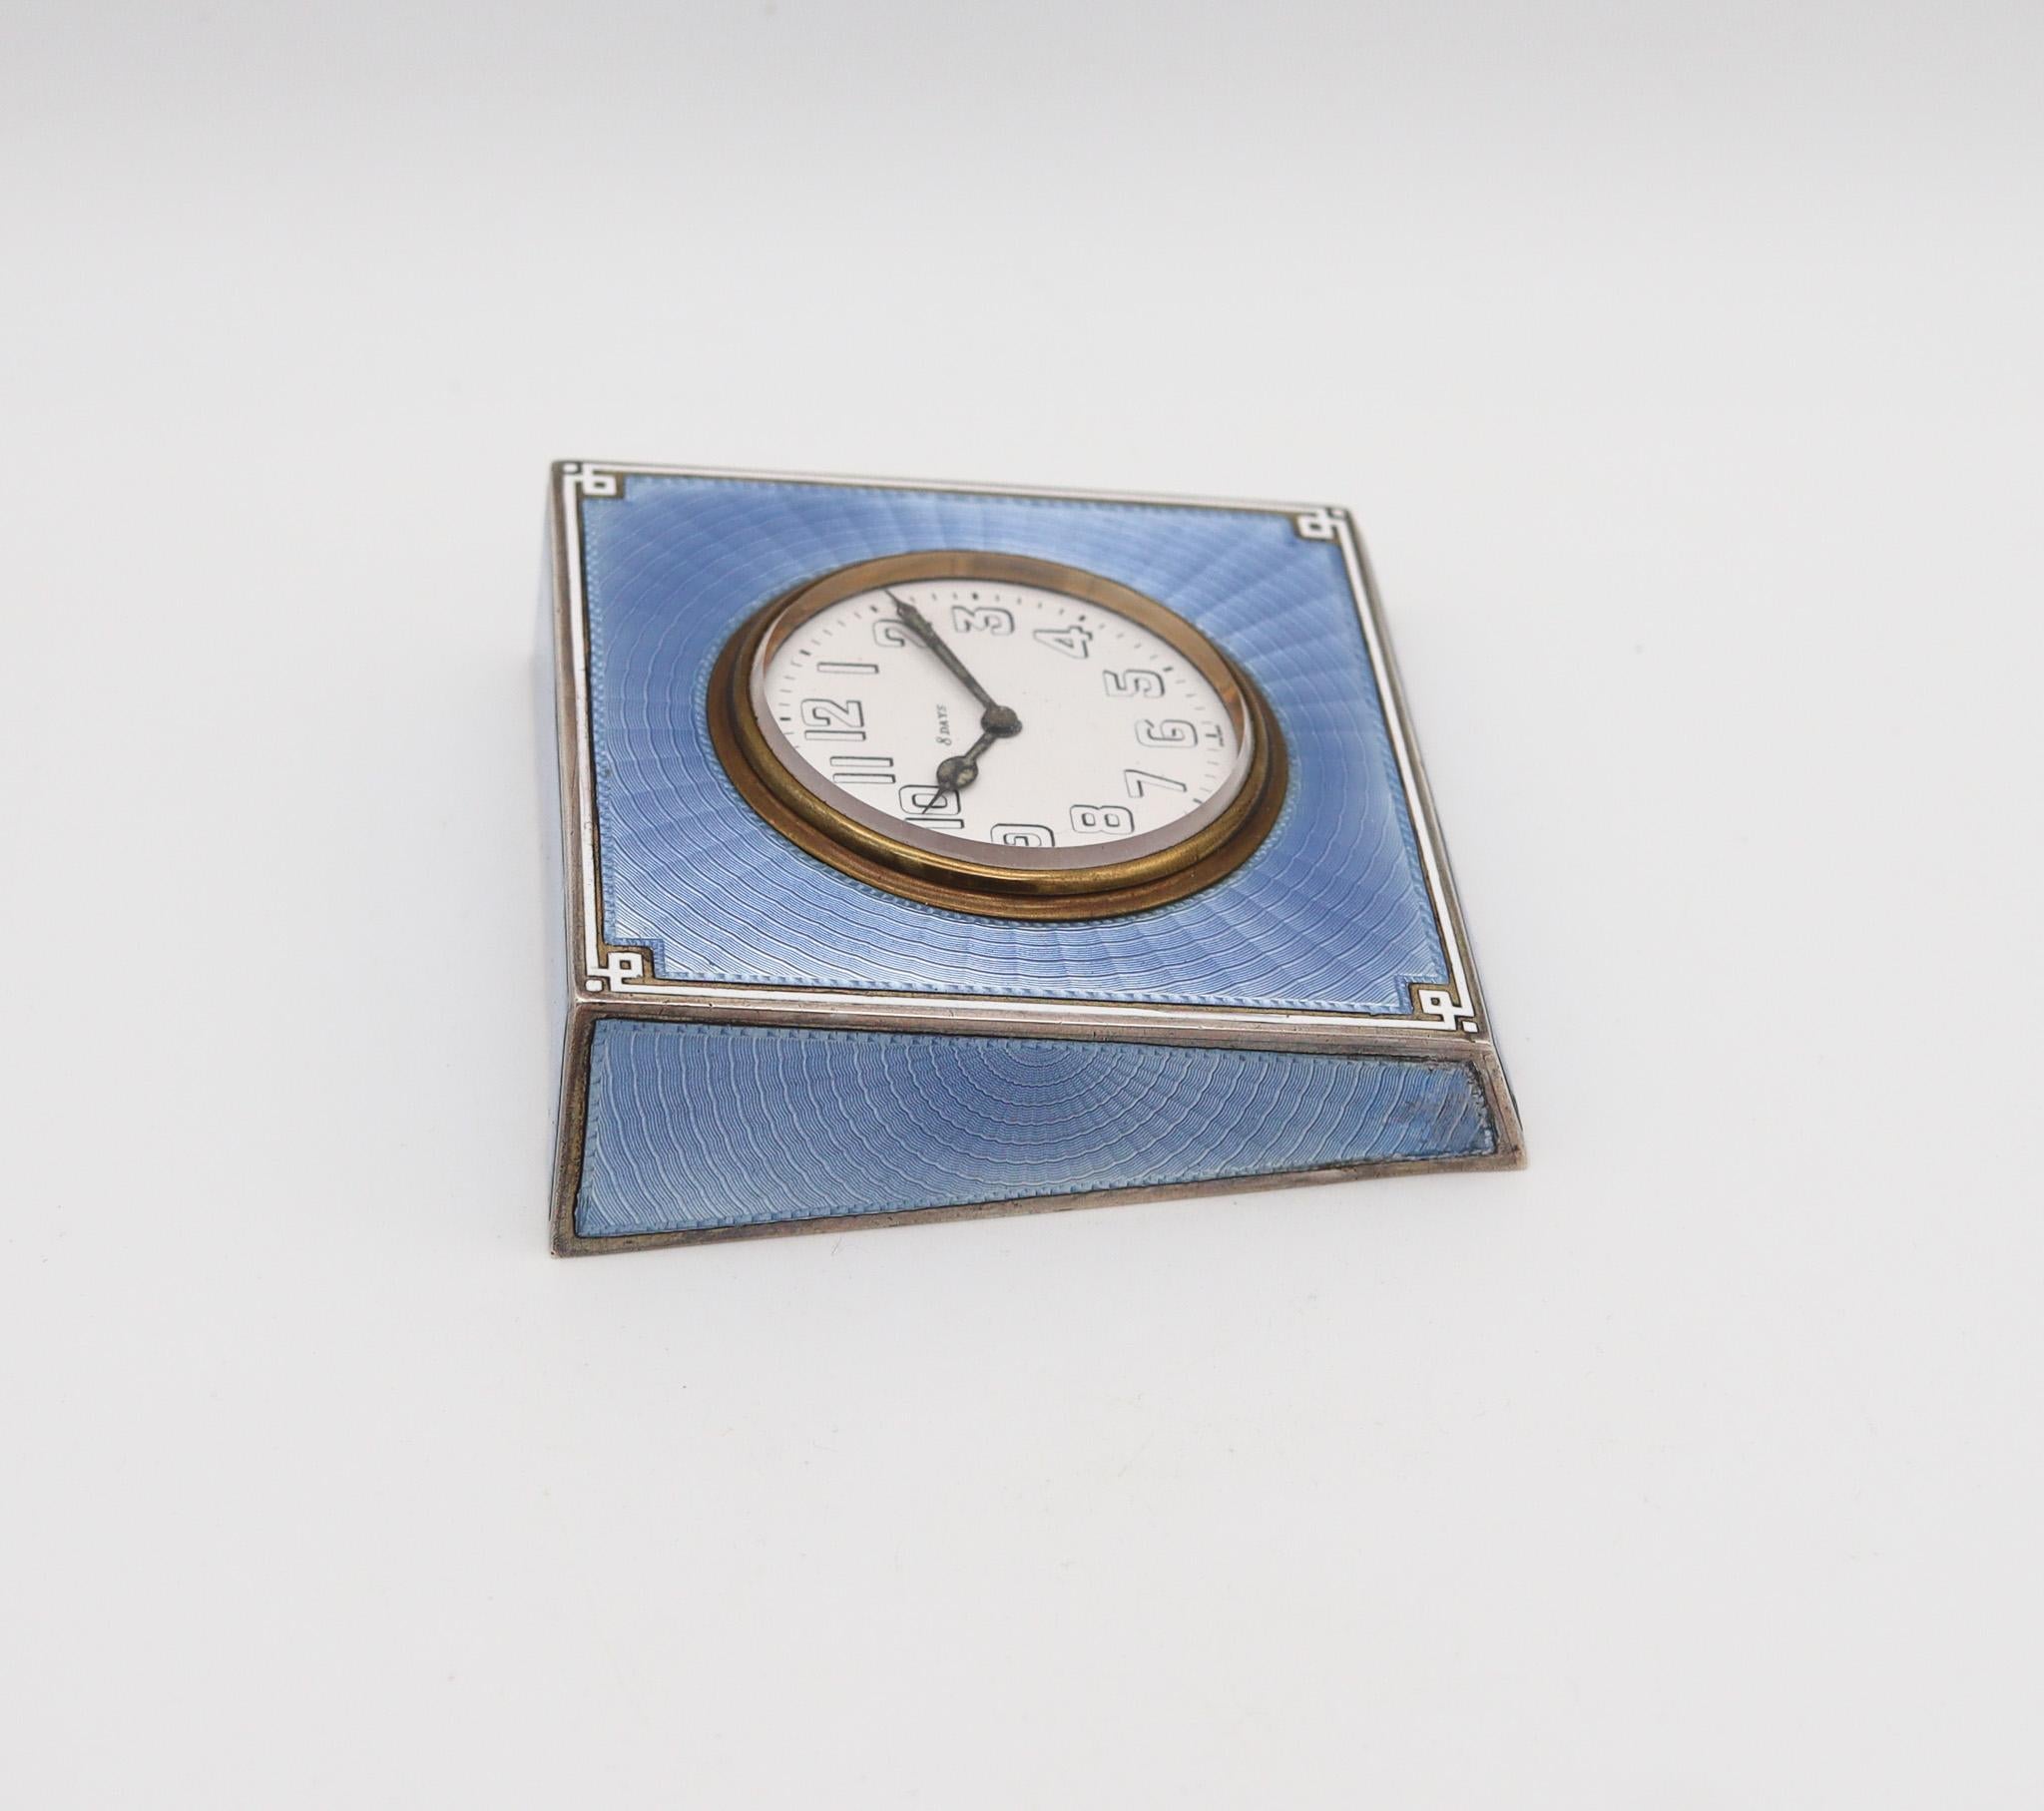 An art deco desk clock with blue enamel.

This is an exceptional desk clock, made in Switzerland during the art deco period, around the 1915. The craftsmanship of this beautiful desk clock is exceptional and was designed with geometric patterns. The